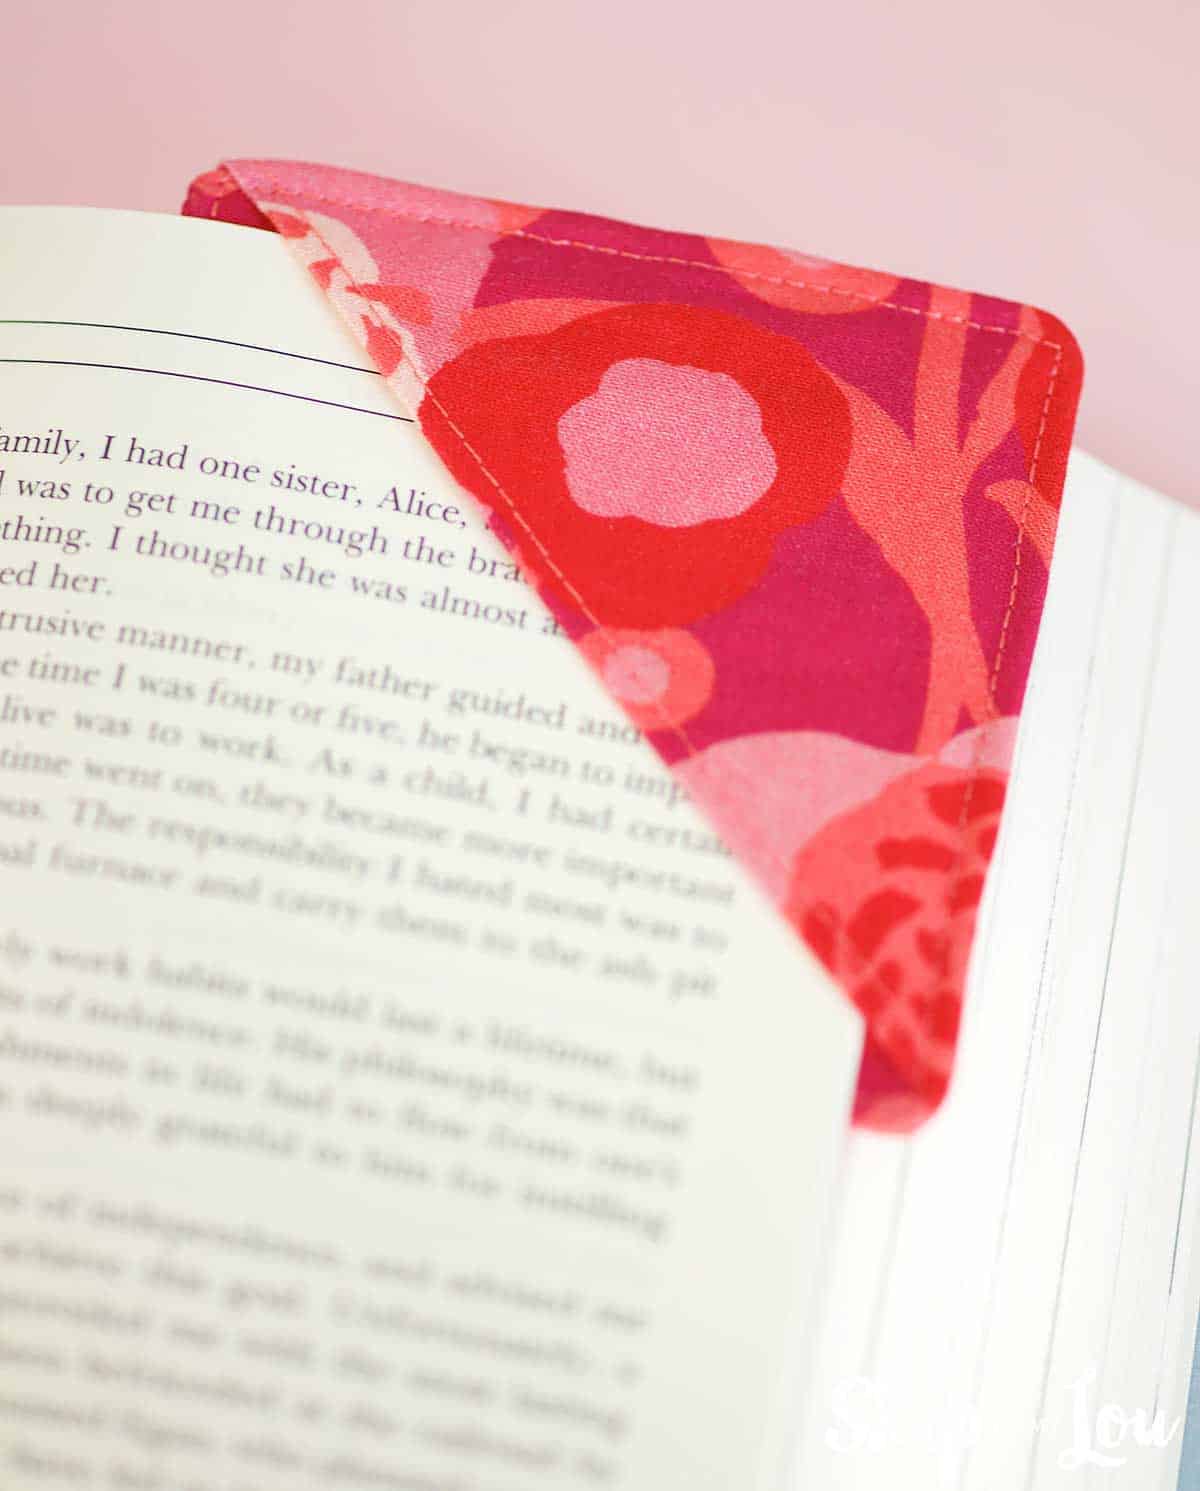 fabric corner bookmark on page in a book